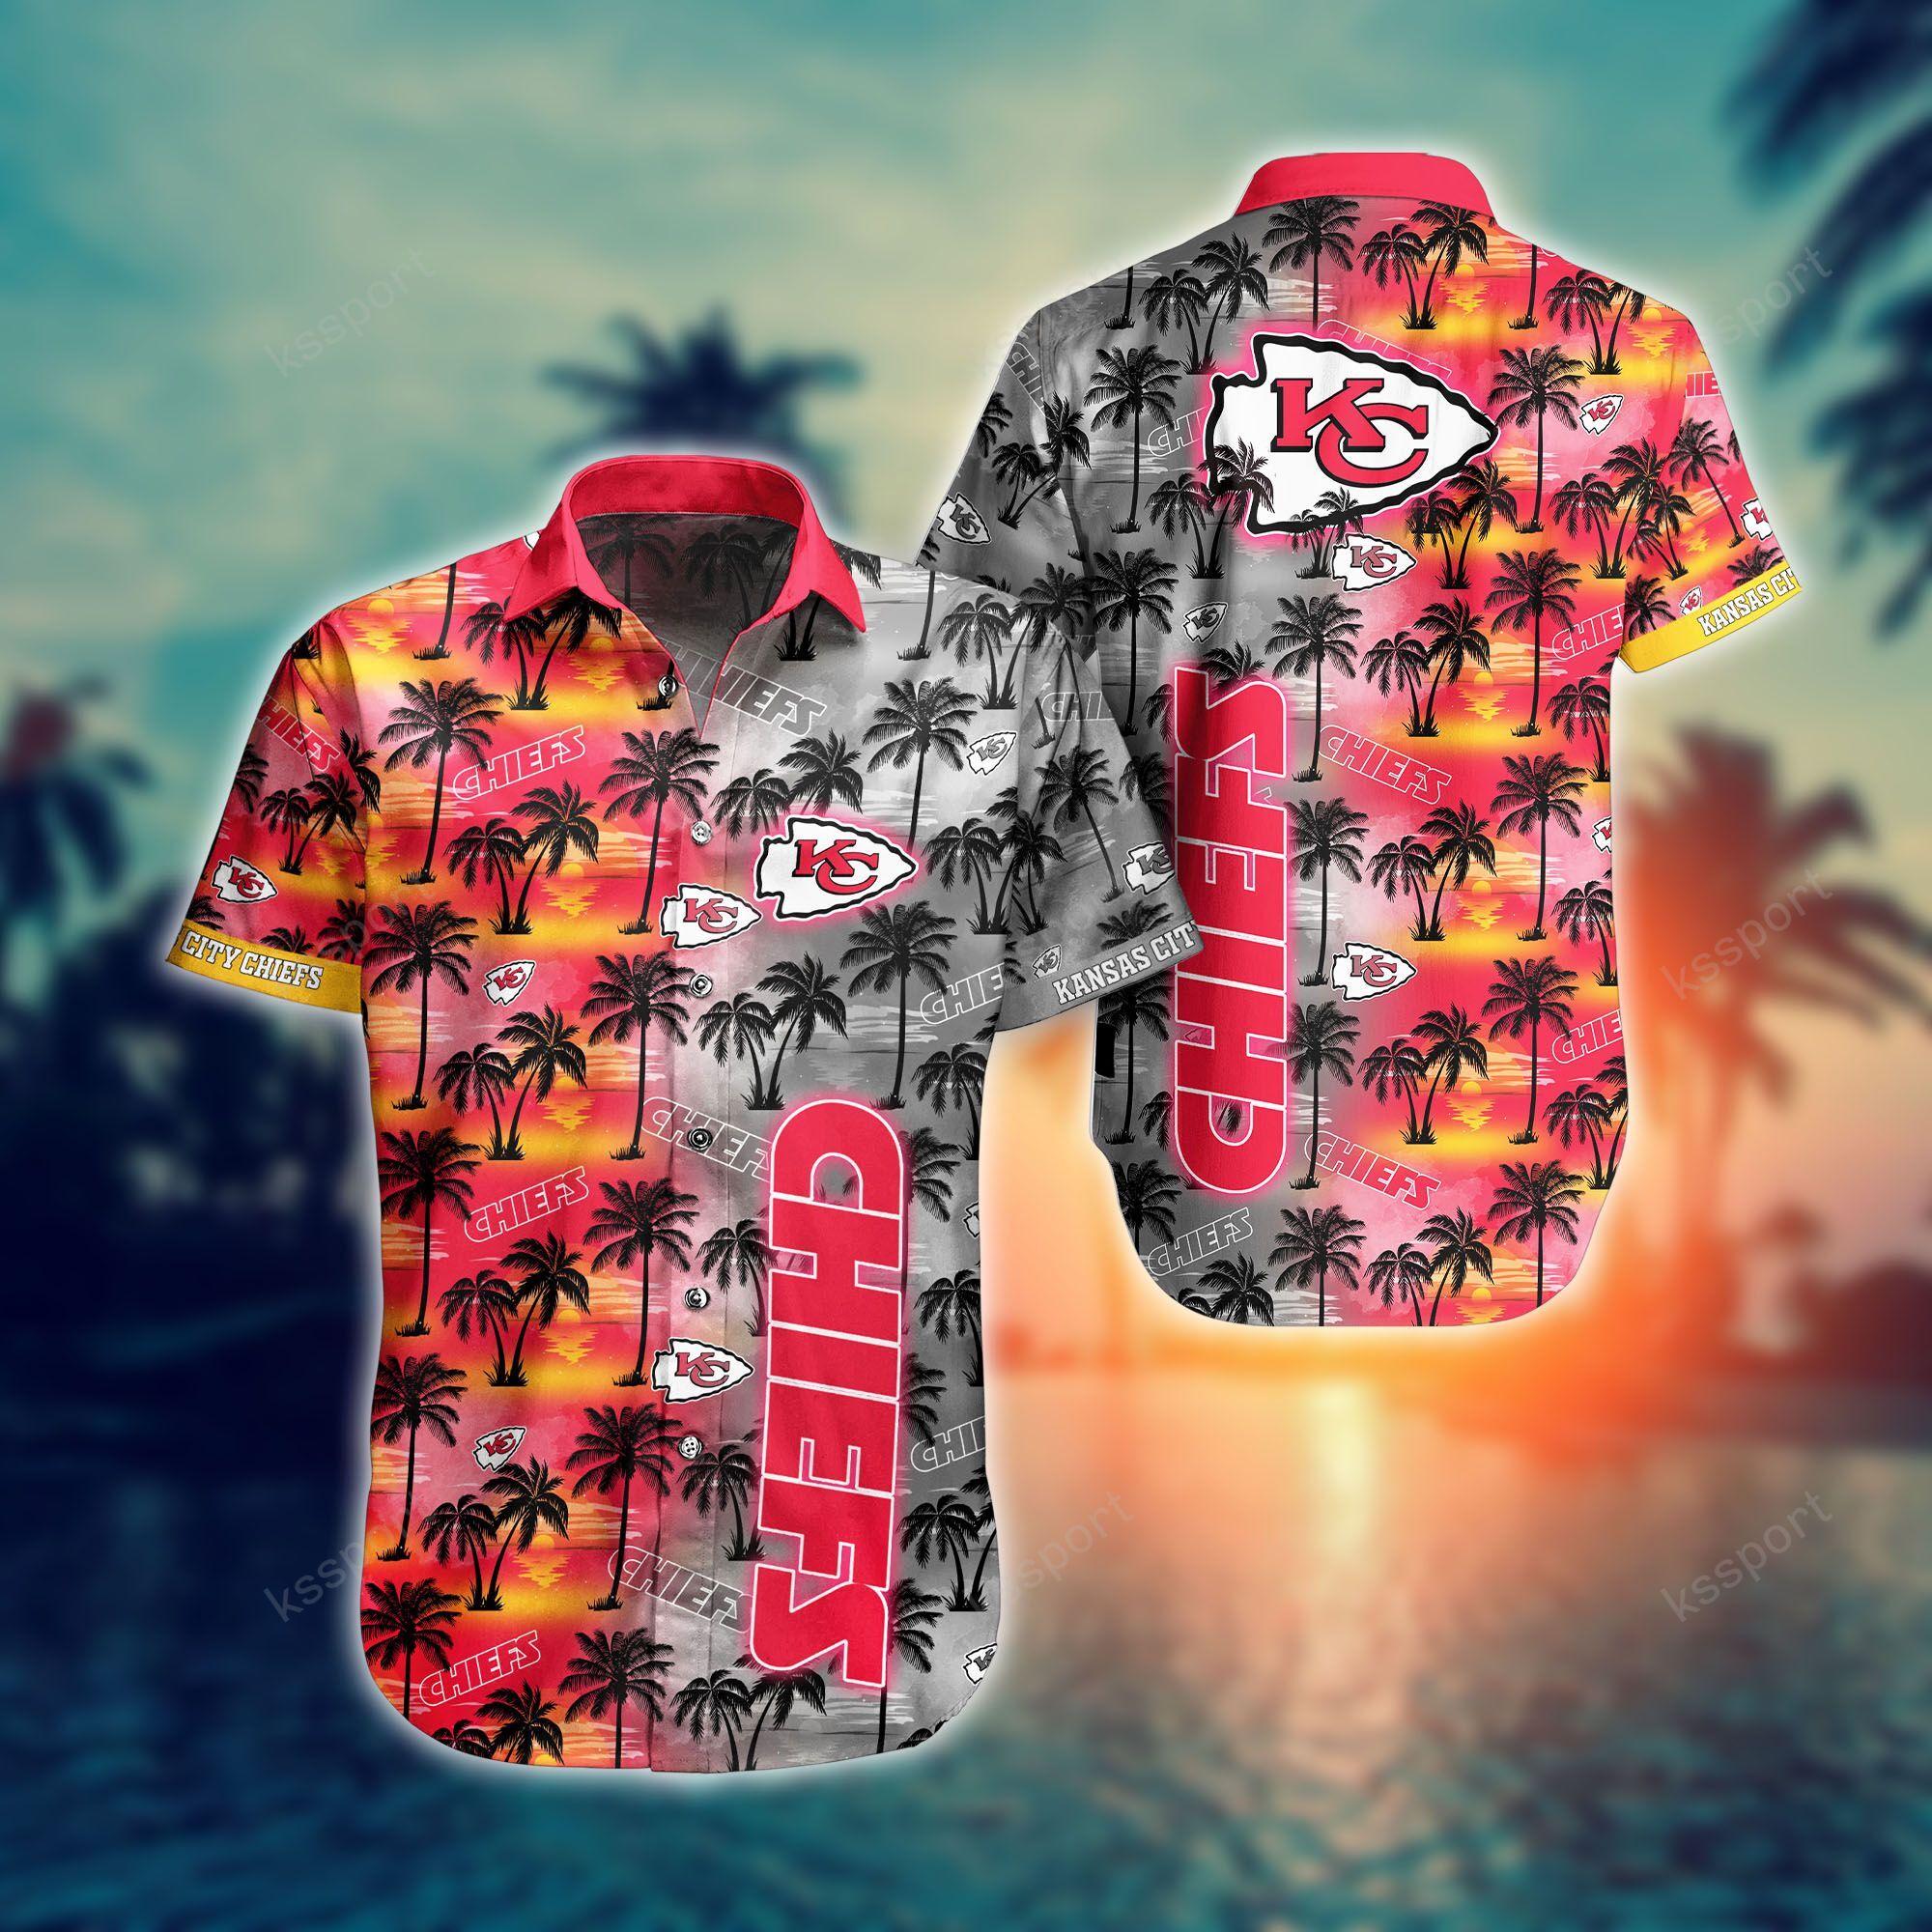 Treat yourself to a cool Hawaiian set today! 102